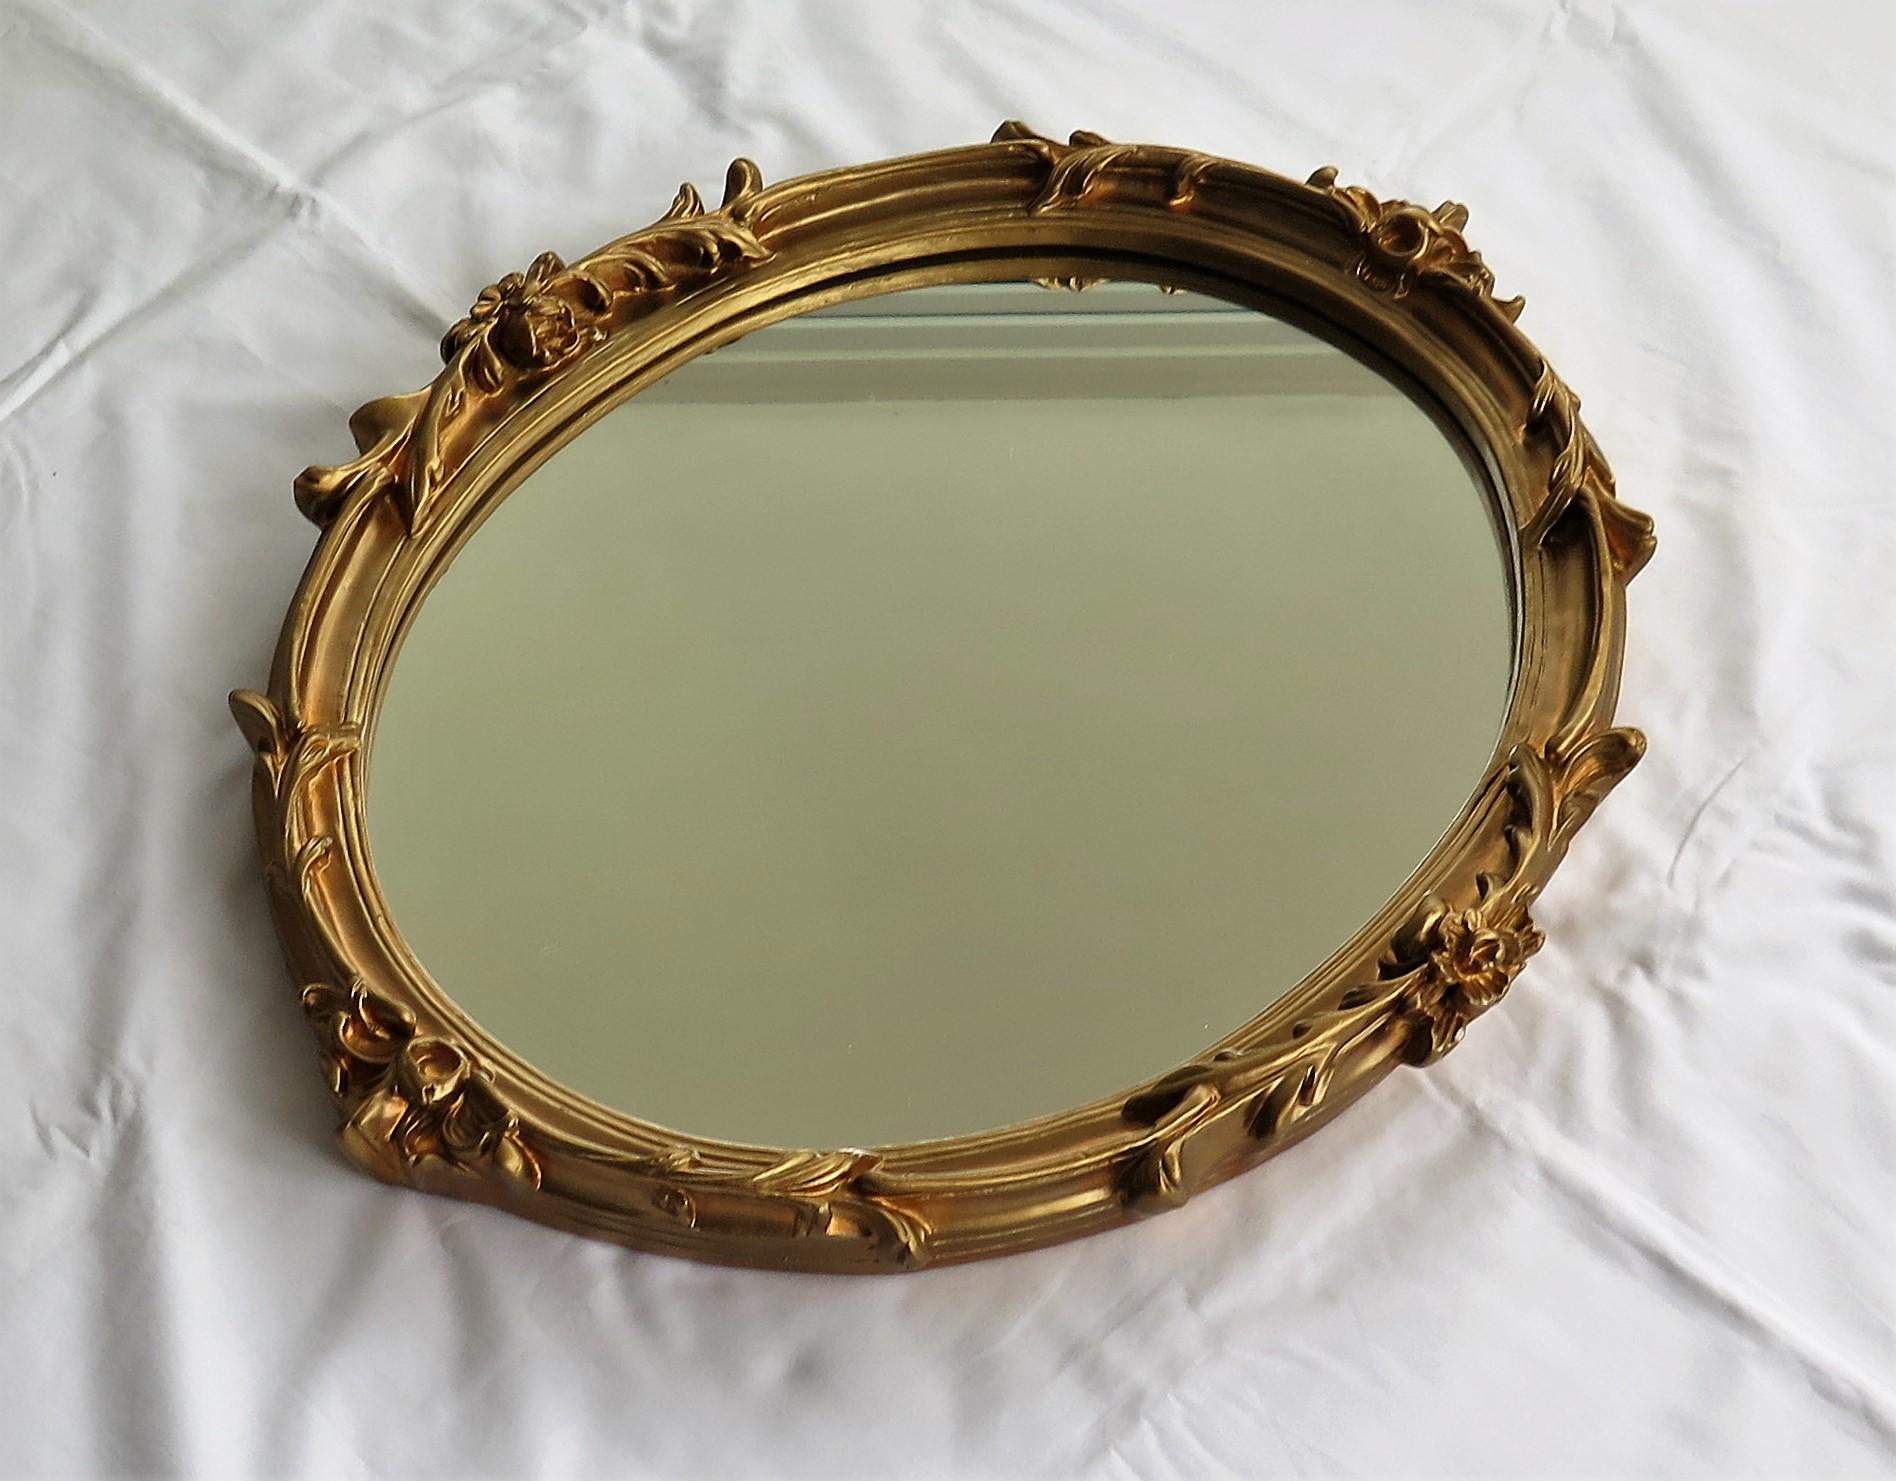 Molded Oval Wall Mirror with Rococo Gold Finish Frame of Gesso on Wood, circa 1930